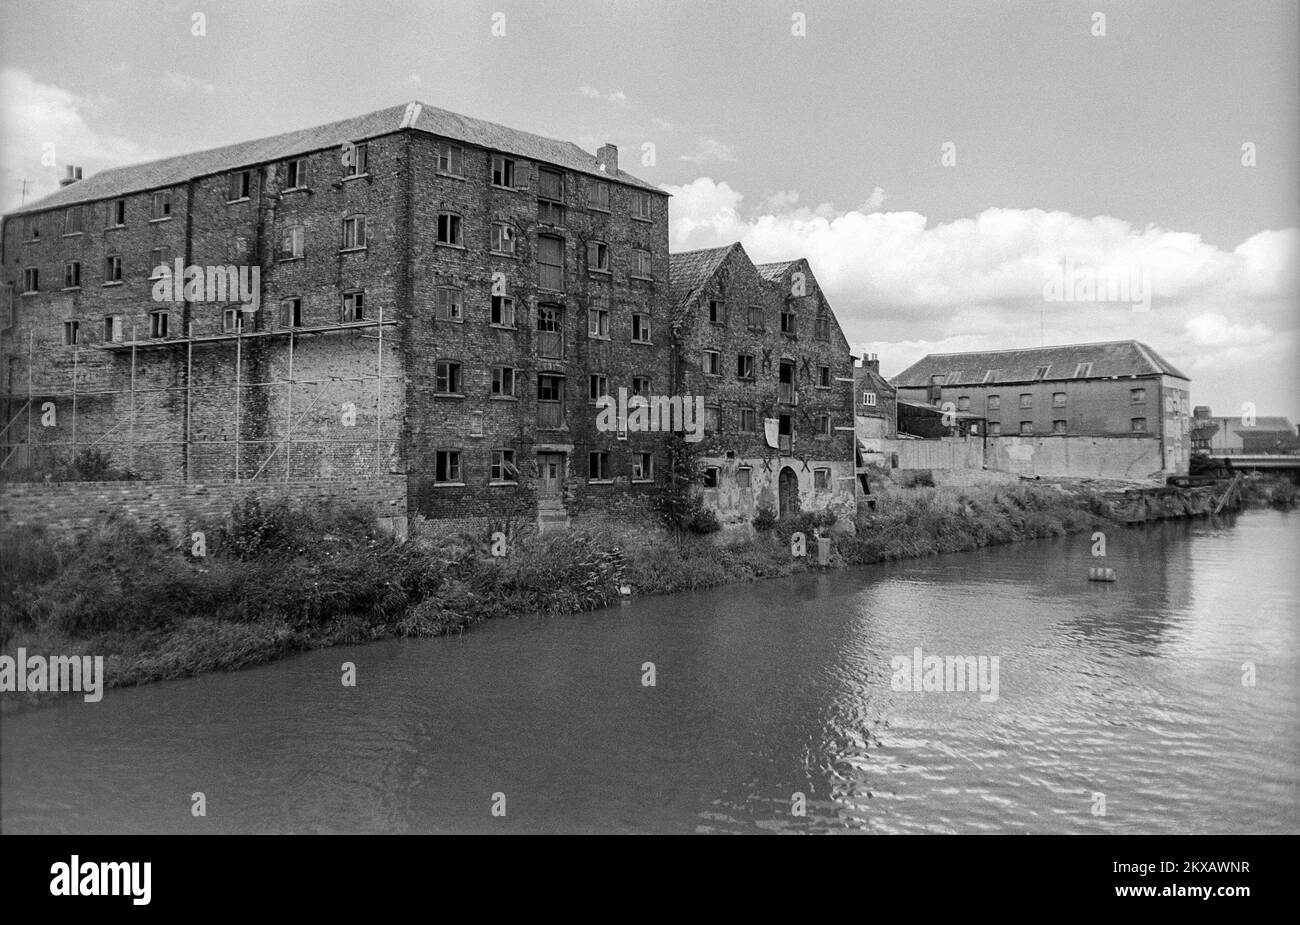 Early 1980s black and white archive photograph of old warehouses on the NW bank of the River Nene in Wisbech, Cambridgeshire. Stock Photo